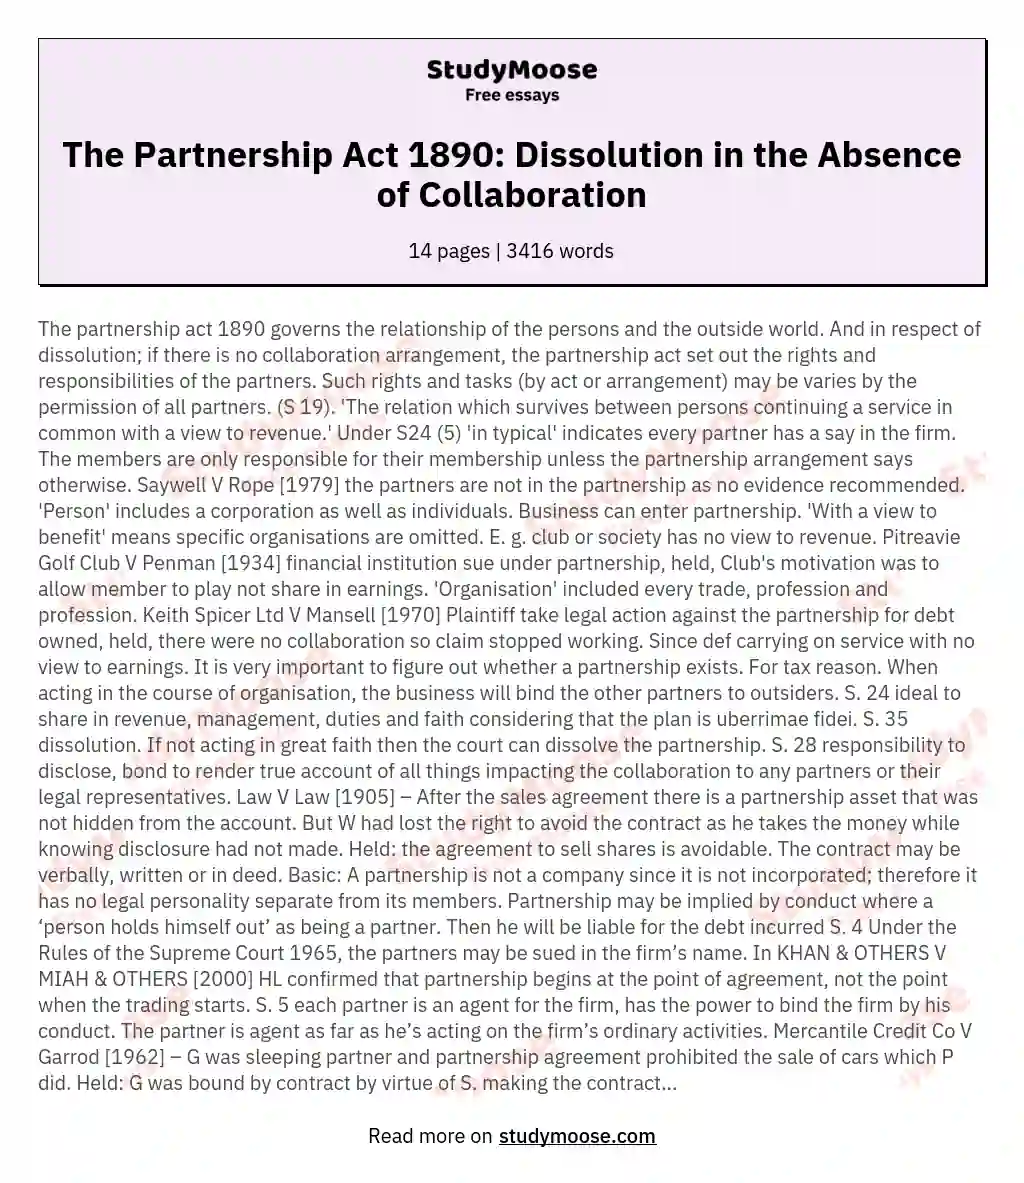 The Partnership Act 1890: Dissolution in the Absence of Collaboration essay